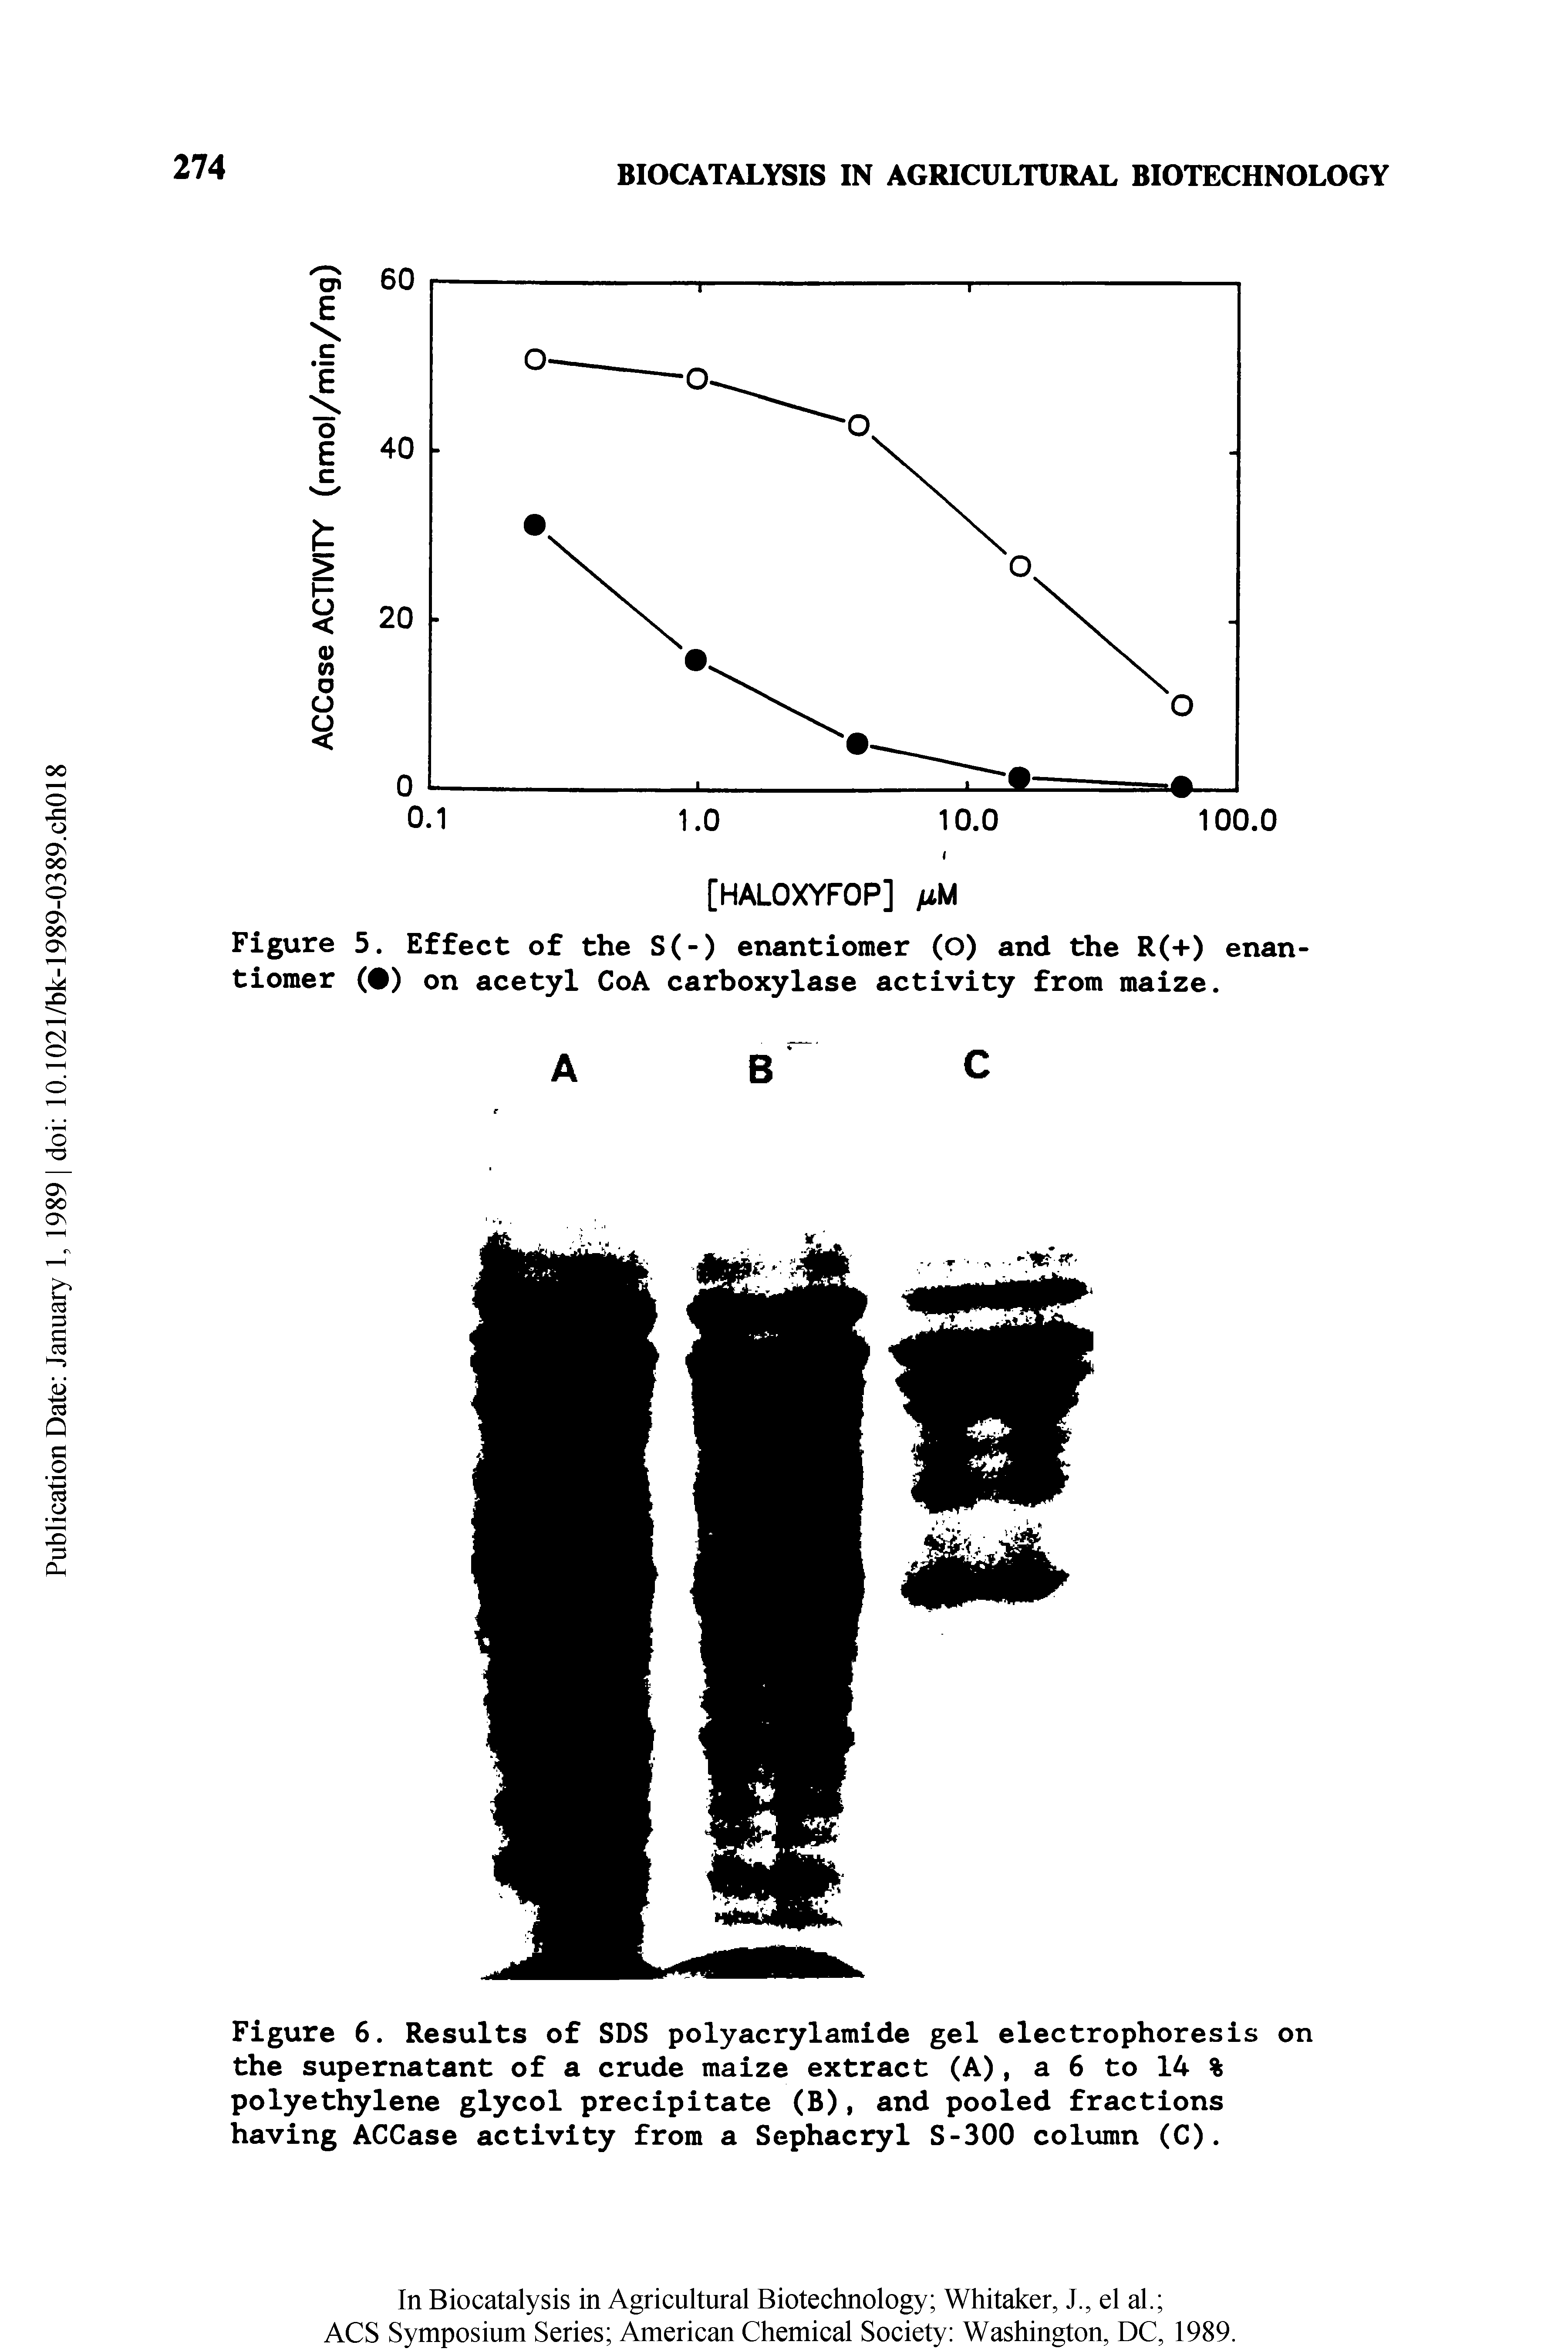 Figure 6. Results of SDS polyacrylamide gel electrophoresis on the supernatant of a crude maize extract (A), a 6 to 14 % polyethylene glycol precipitate (B), and pooled fractions having ACCase activity from a Sephacryl S-300 column (C).